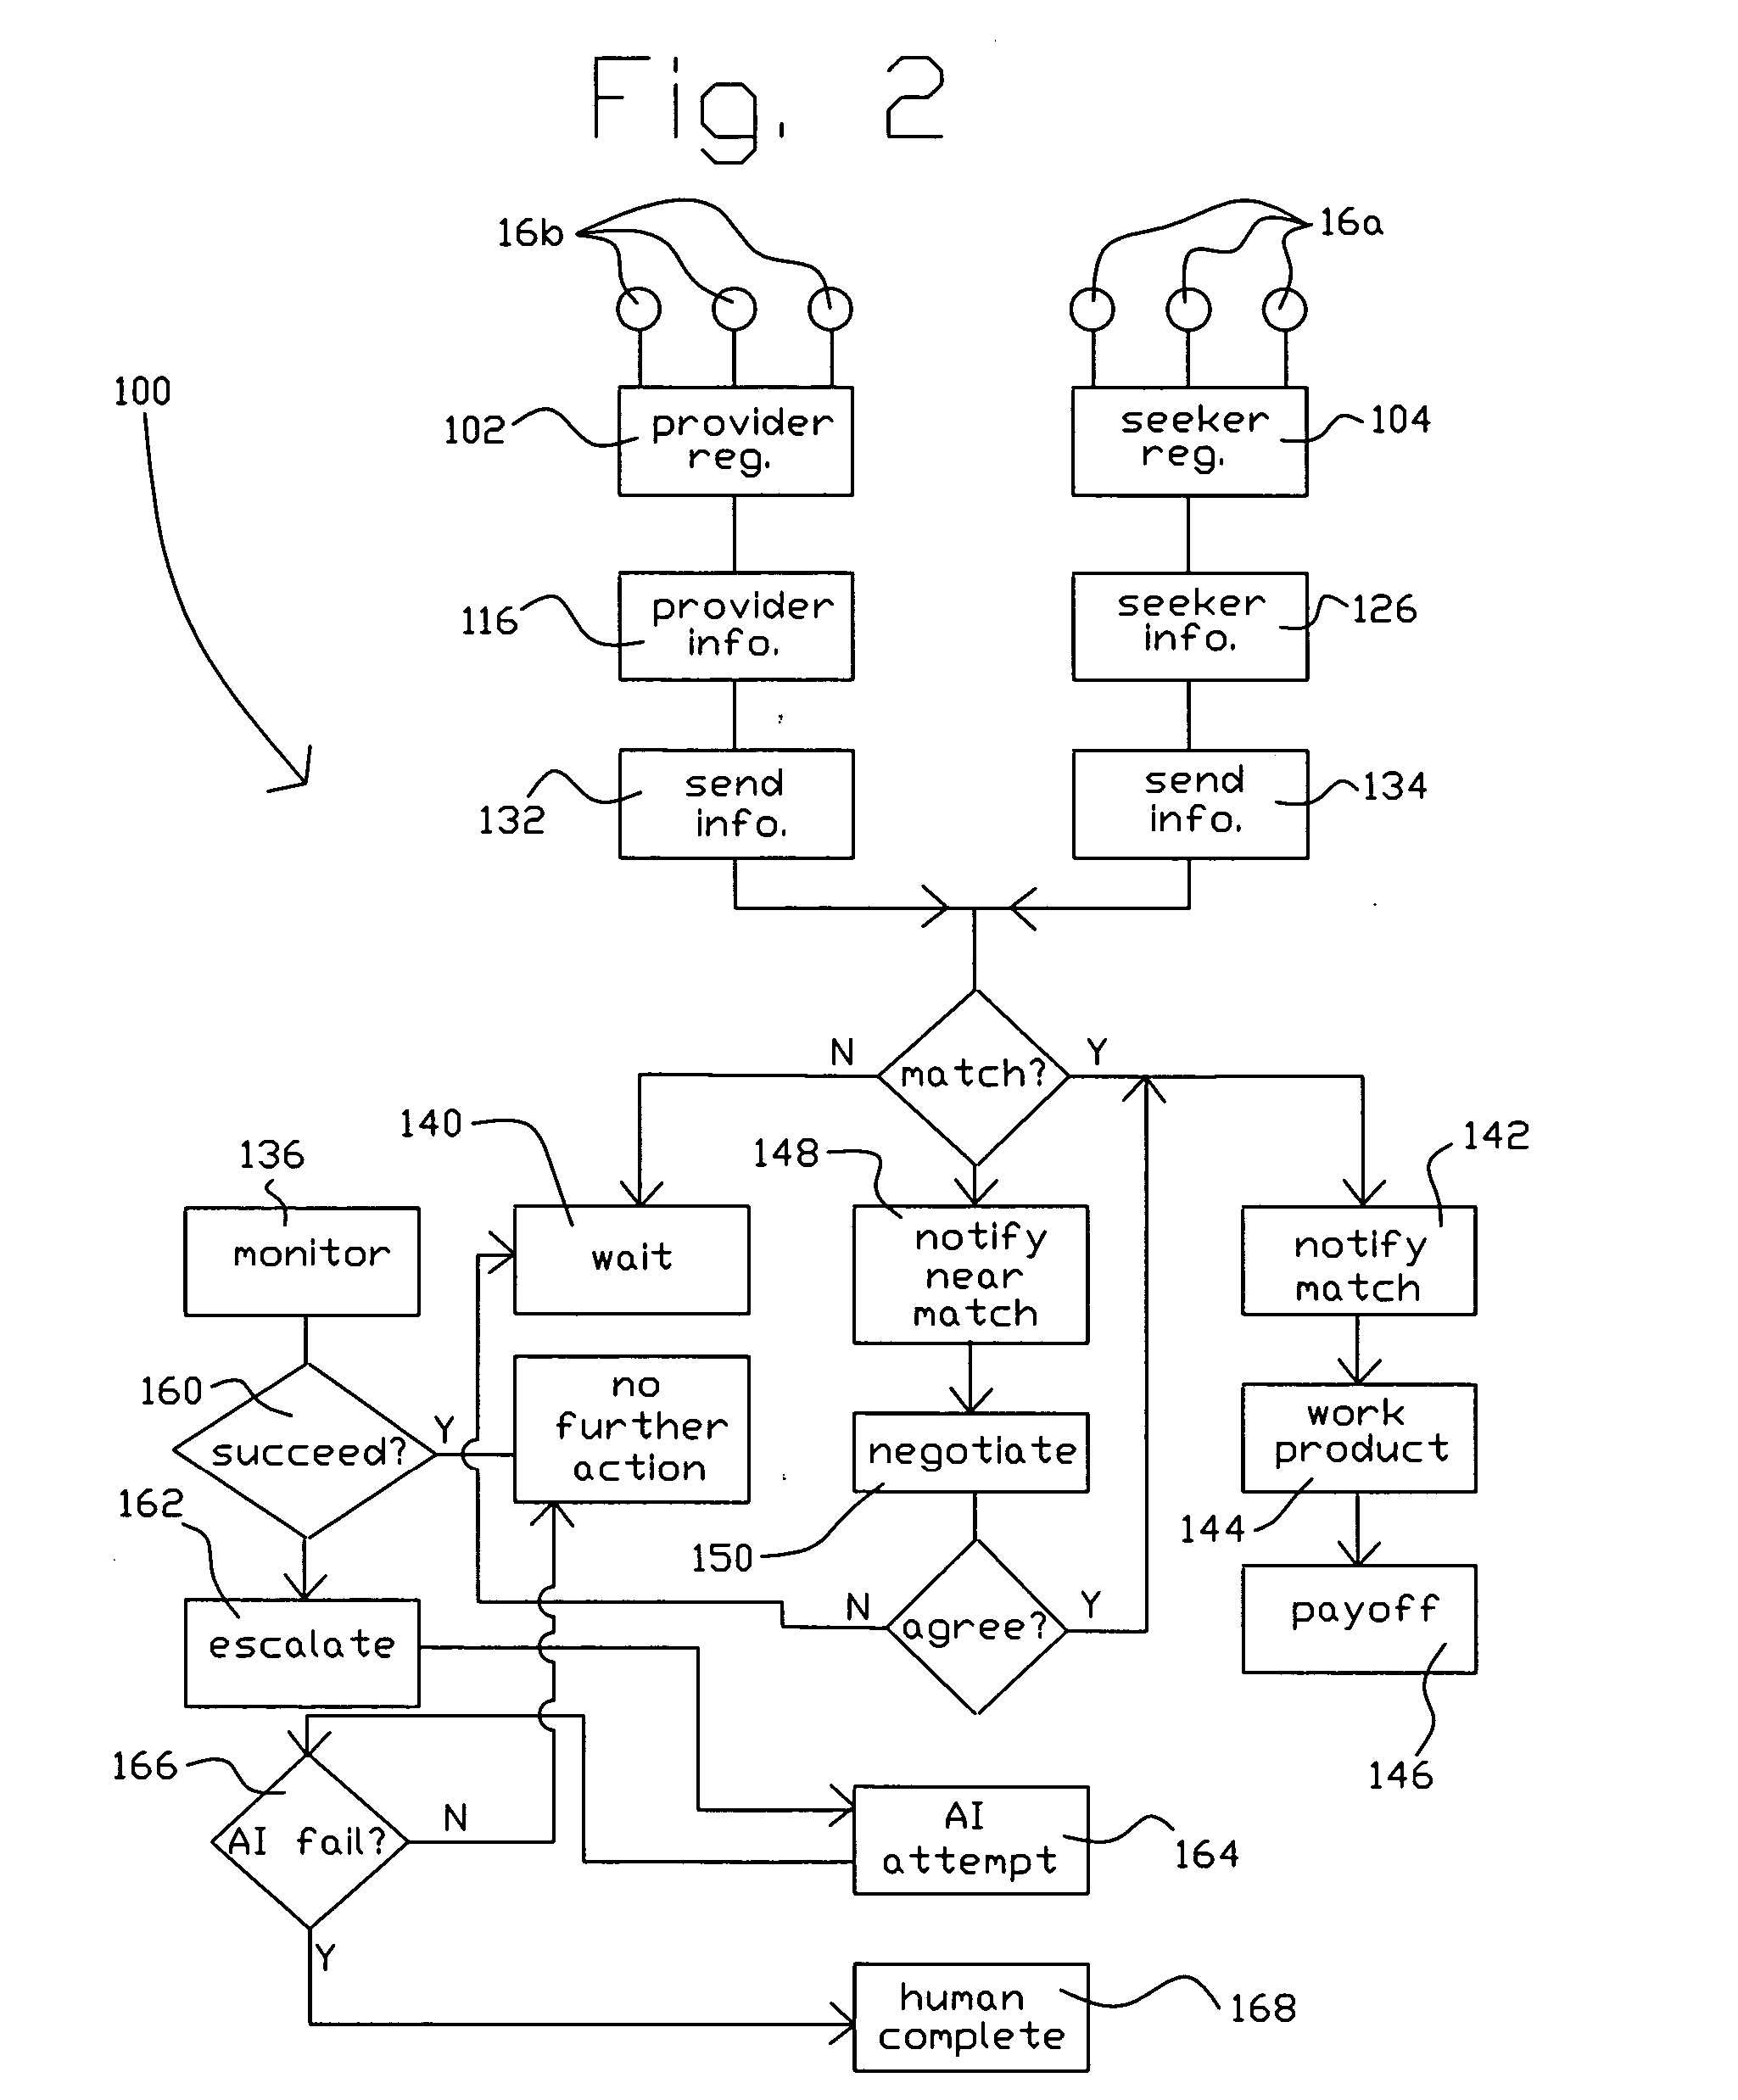 Apparatus and method for simulating artificial intelligence over computer networks